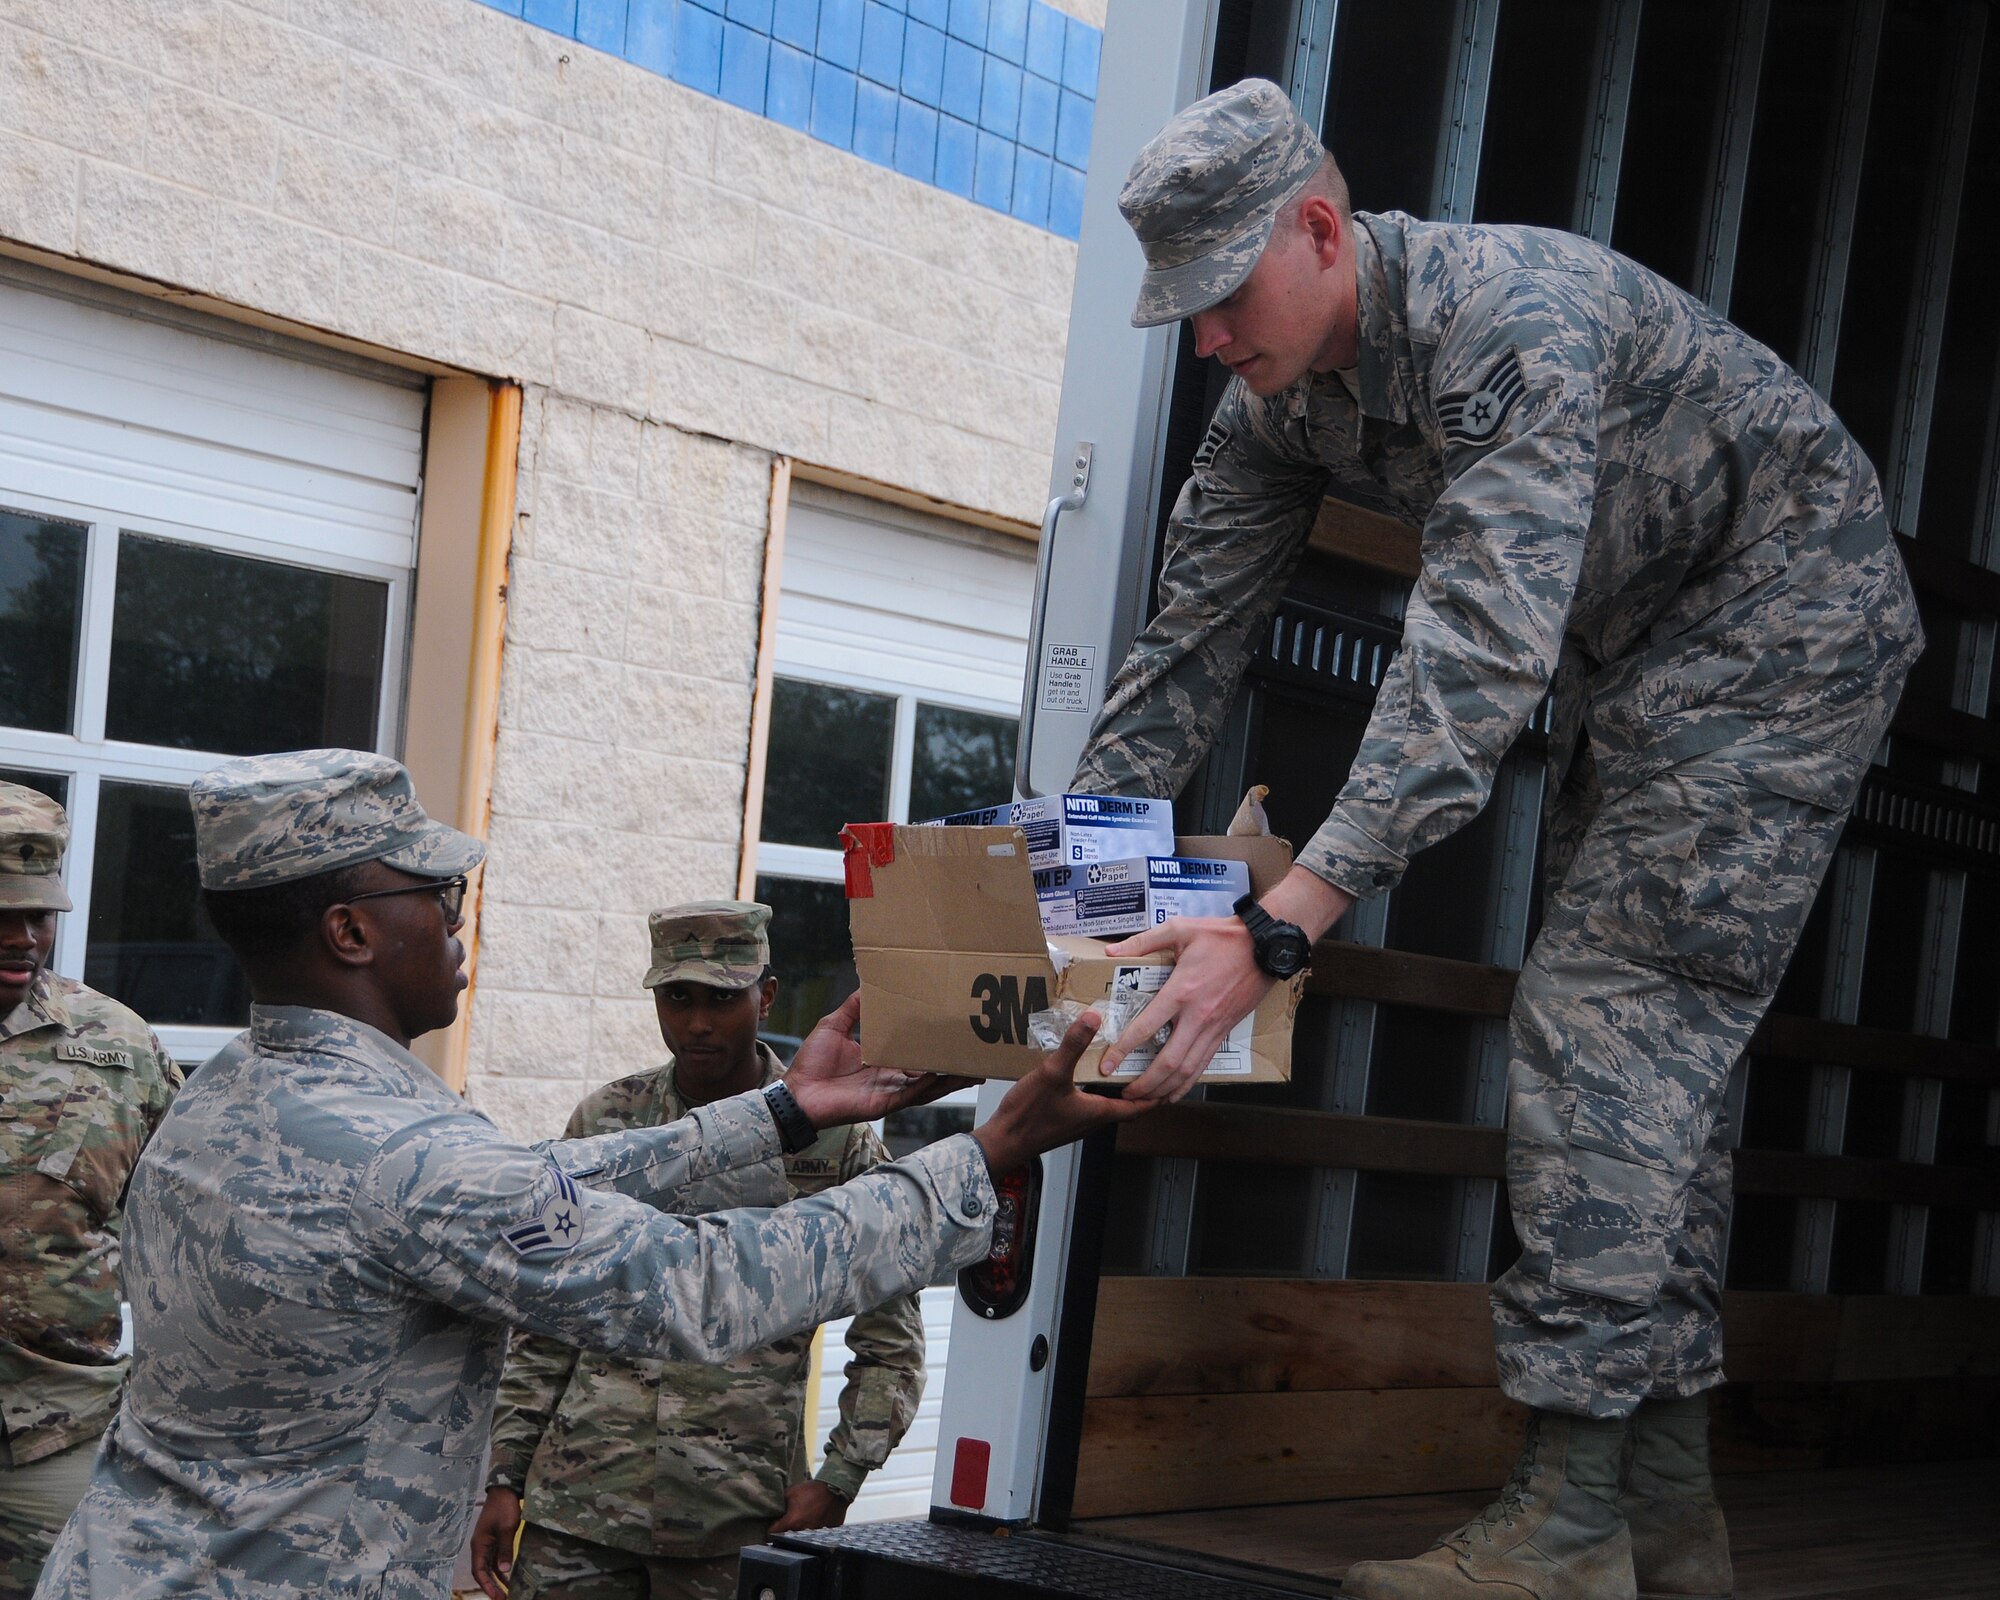 Airmen from the 186th Air Refueling Wing help unload personal protective equipment at the Bonita Lakes mobile COVID-19 testing facility, April 1, 2020, Meridian, Mississippi. Airmen and Soldiers from the Mississippi National Guard are aiding the Mississippi Department of Health and other supporting agencies to locate and stop the spread of COVID-19 around the state. (U.S. Air National Guard photo by Tech Sgt. Adam Vance)